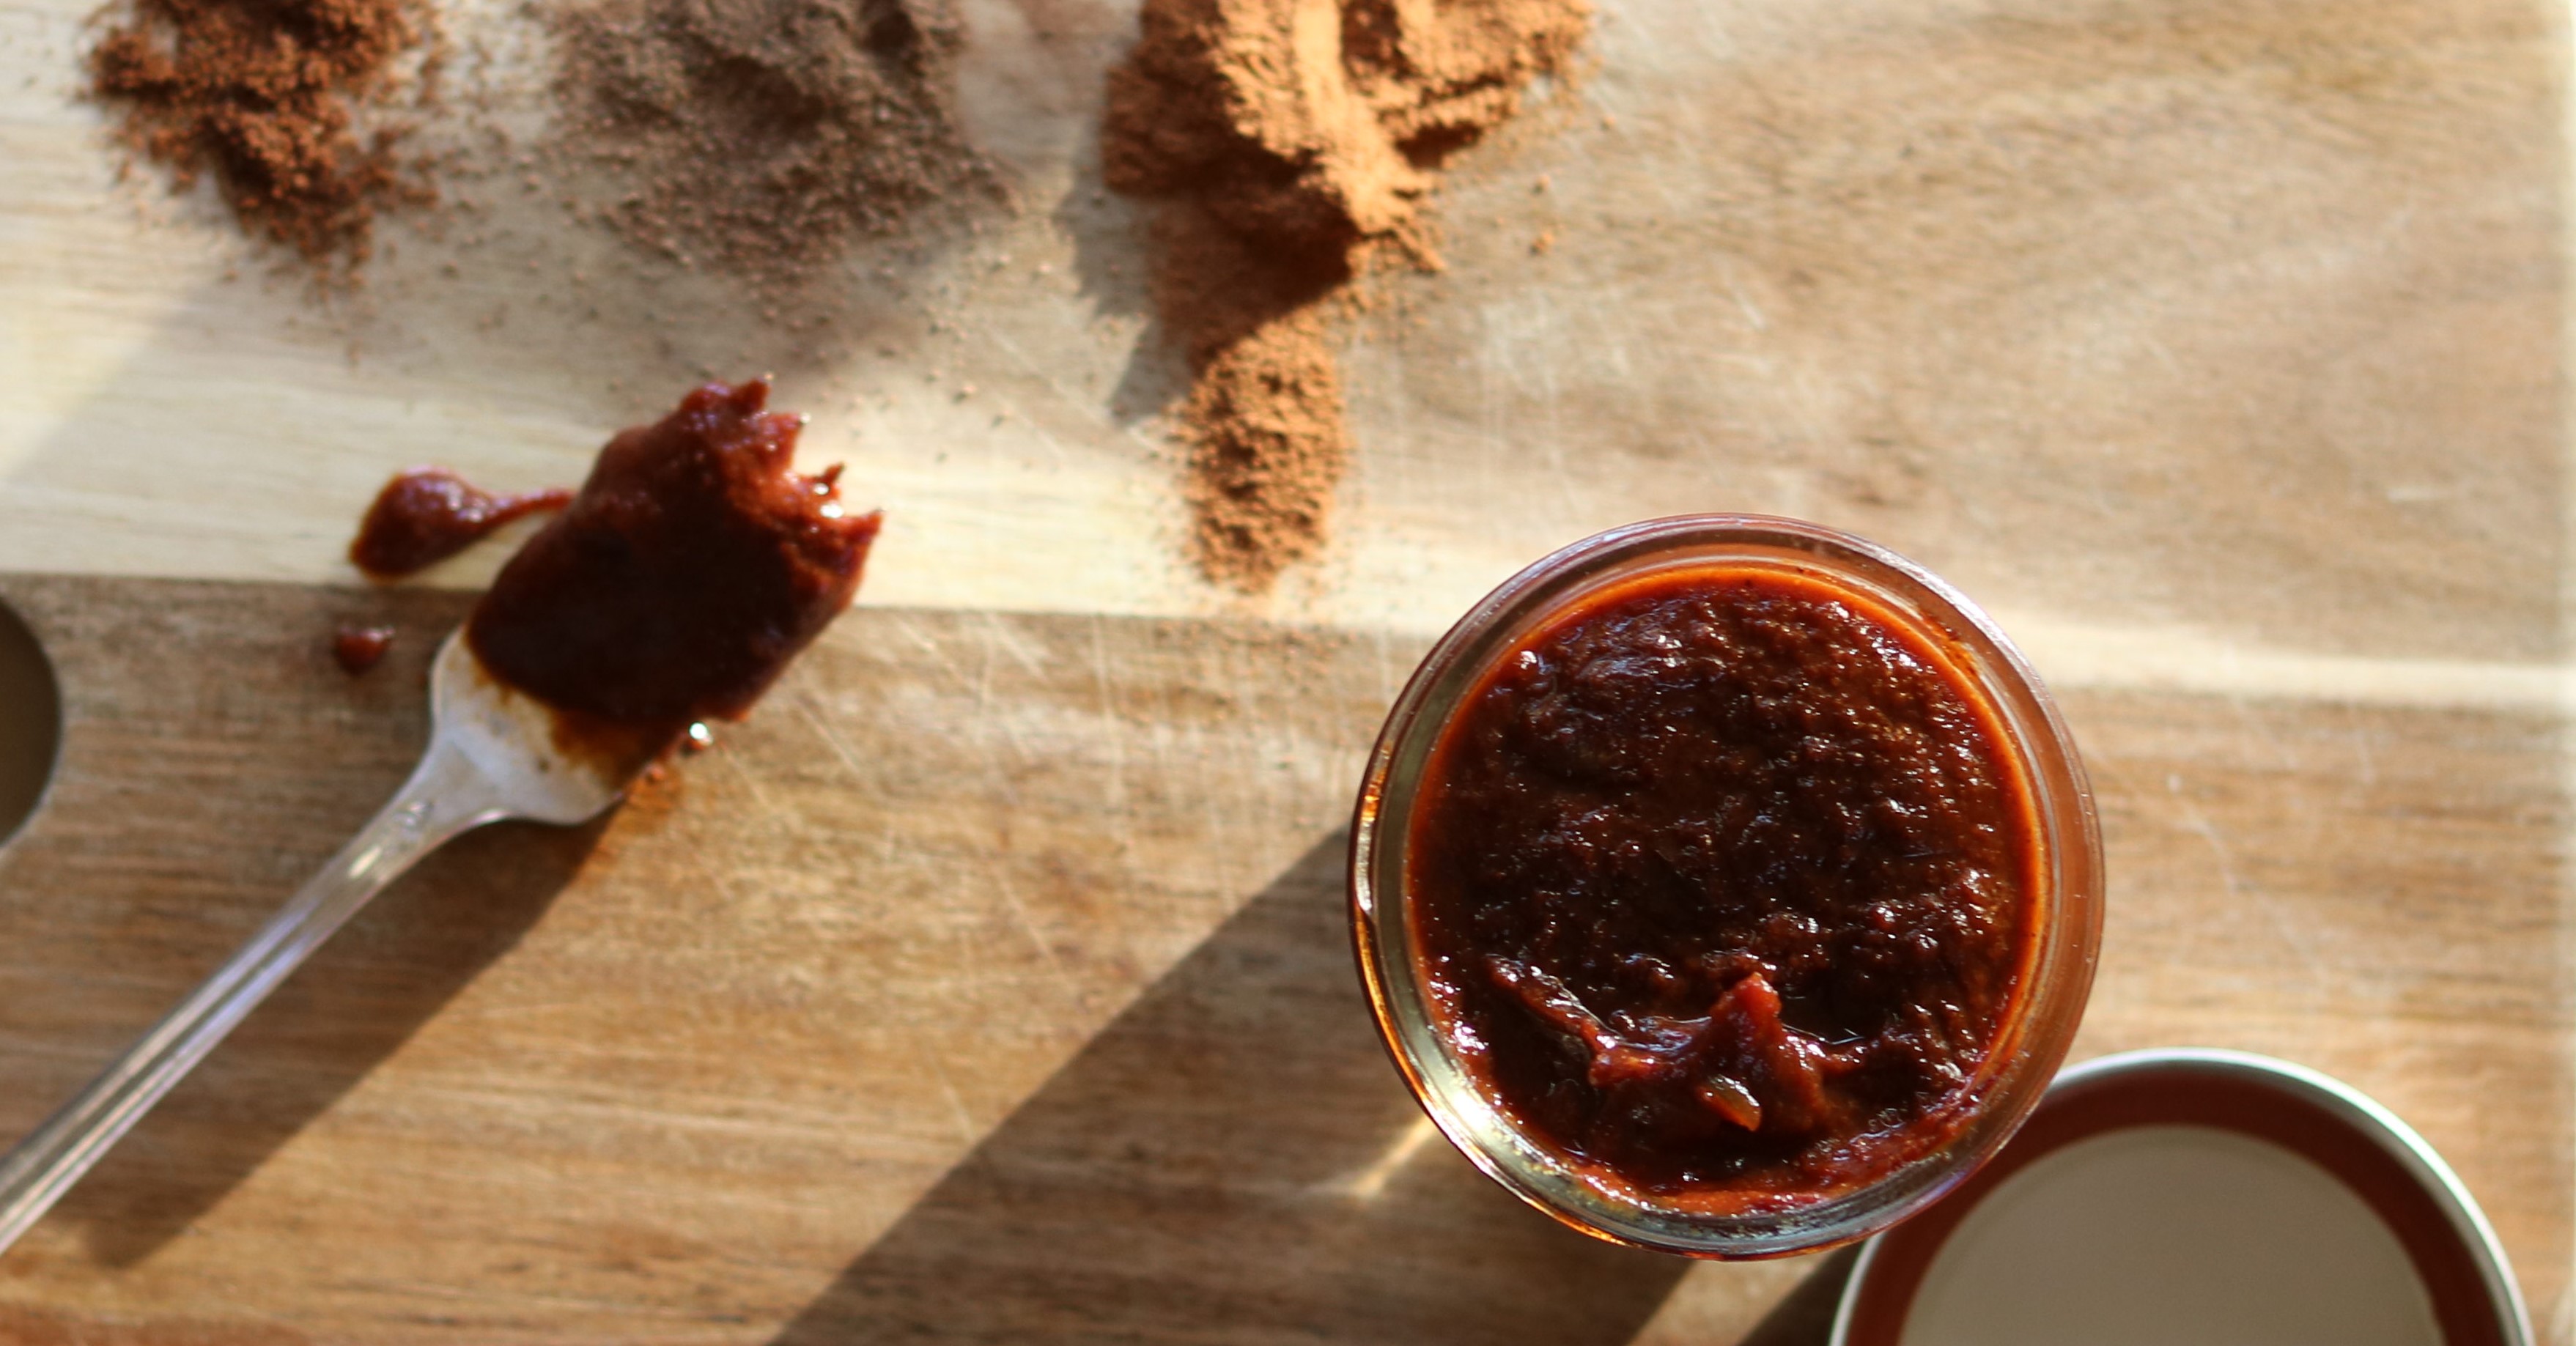 Homemade ketchup is worlds away from the high fructose corn syrup laden store bought stuff. It's complex, spicy, vegan and sustainably made with love.